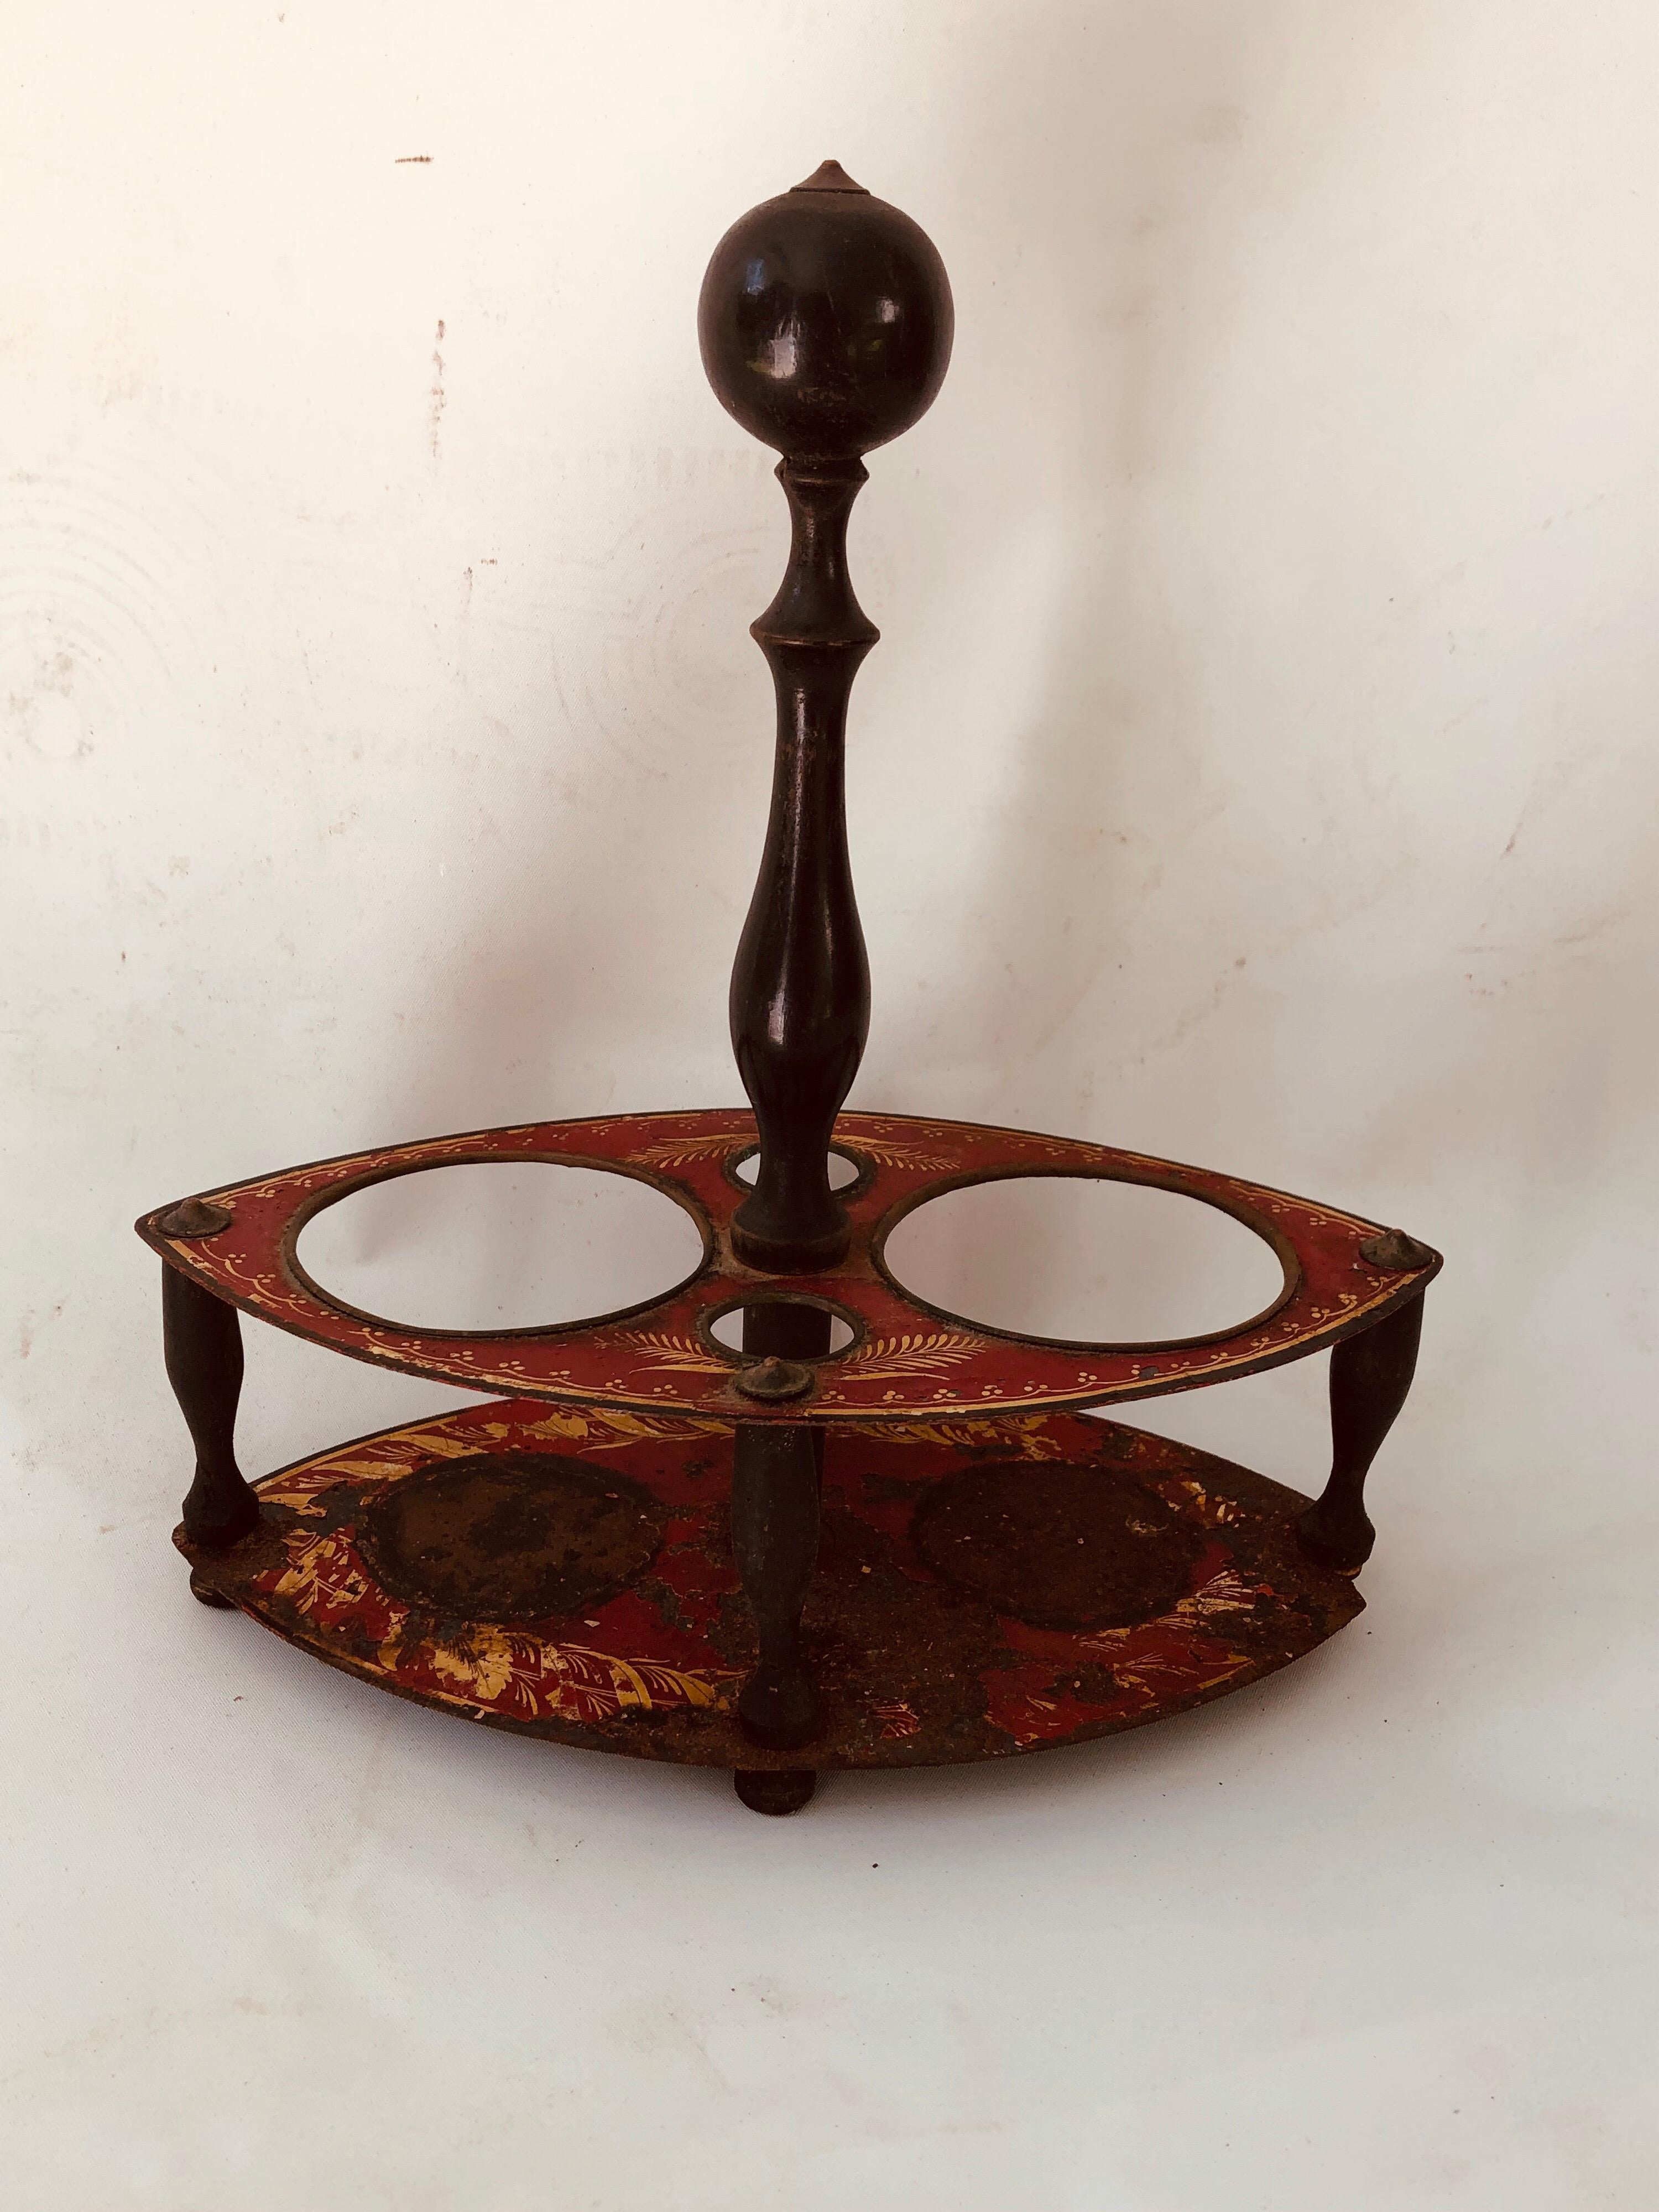 French late 18th-early 19th century tole red painted, with gold decoration, oil and vinegar holder. Also would have held other condiments. On wooden legs and carrying post, circa 1820.